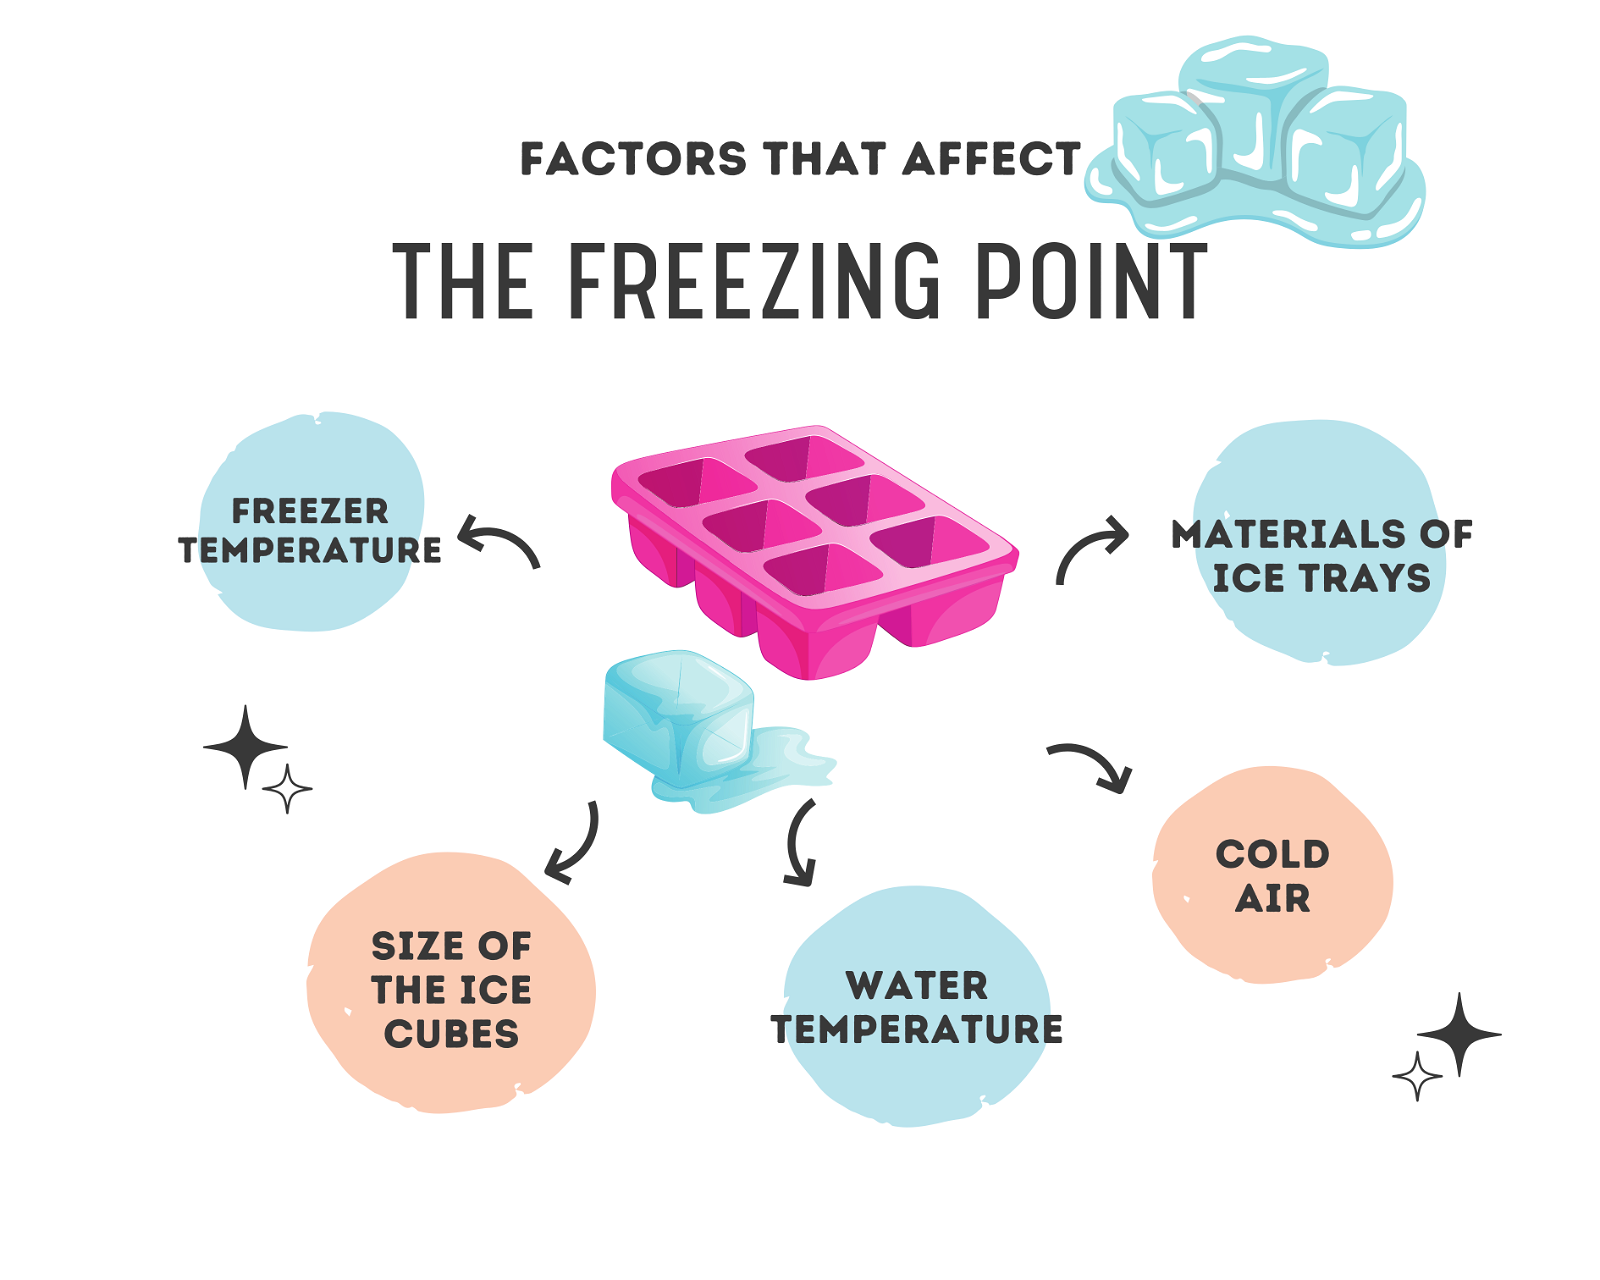 How Long Does It Take Ice to Freeze?